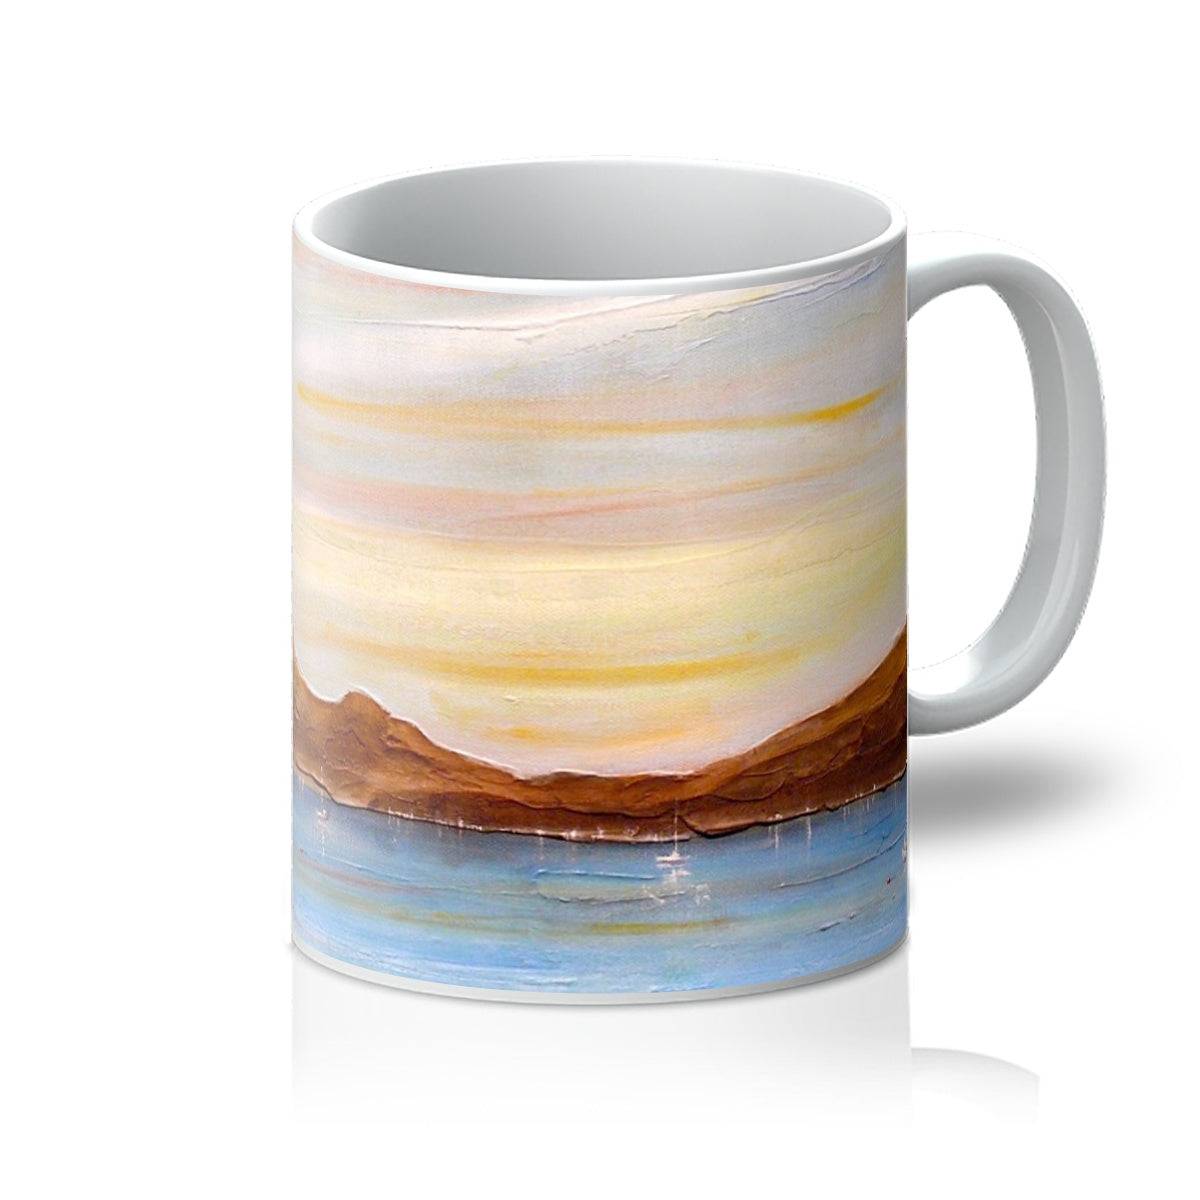 The Last Ferry To Dunoon Art Gifts Mug-Mugs-River Clyde Art Gallery-11oz-White-Paintings, Prints, Homeware, Art Gifts From Scotland By Scottish Artist Kevin Hunter